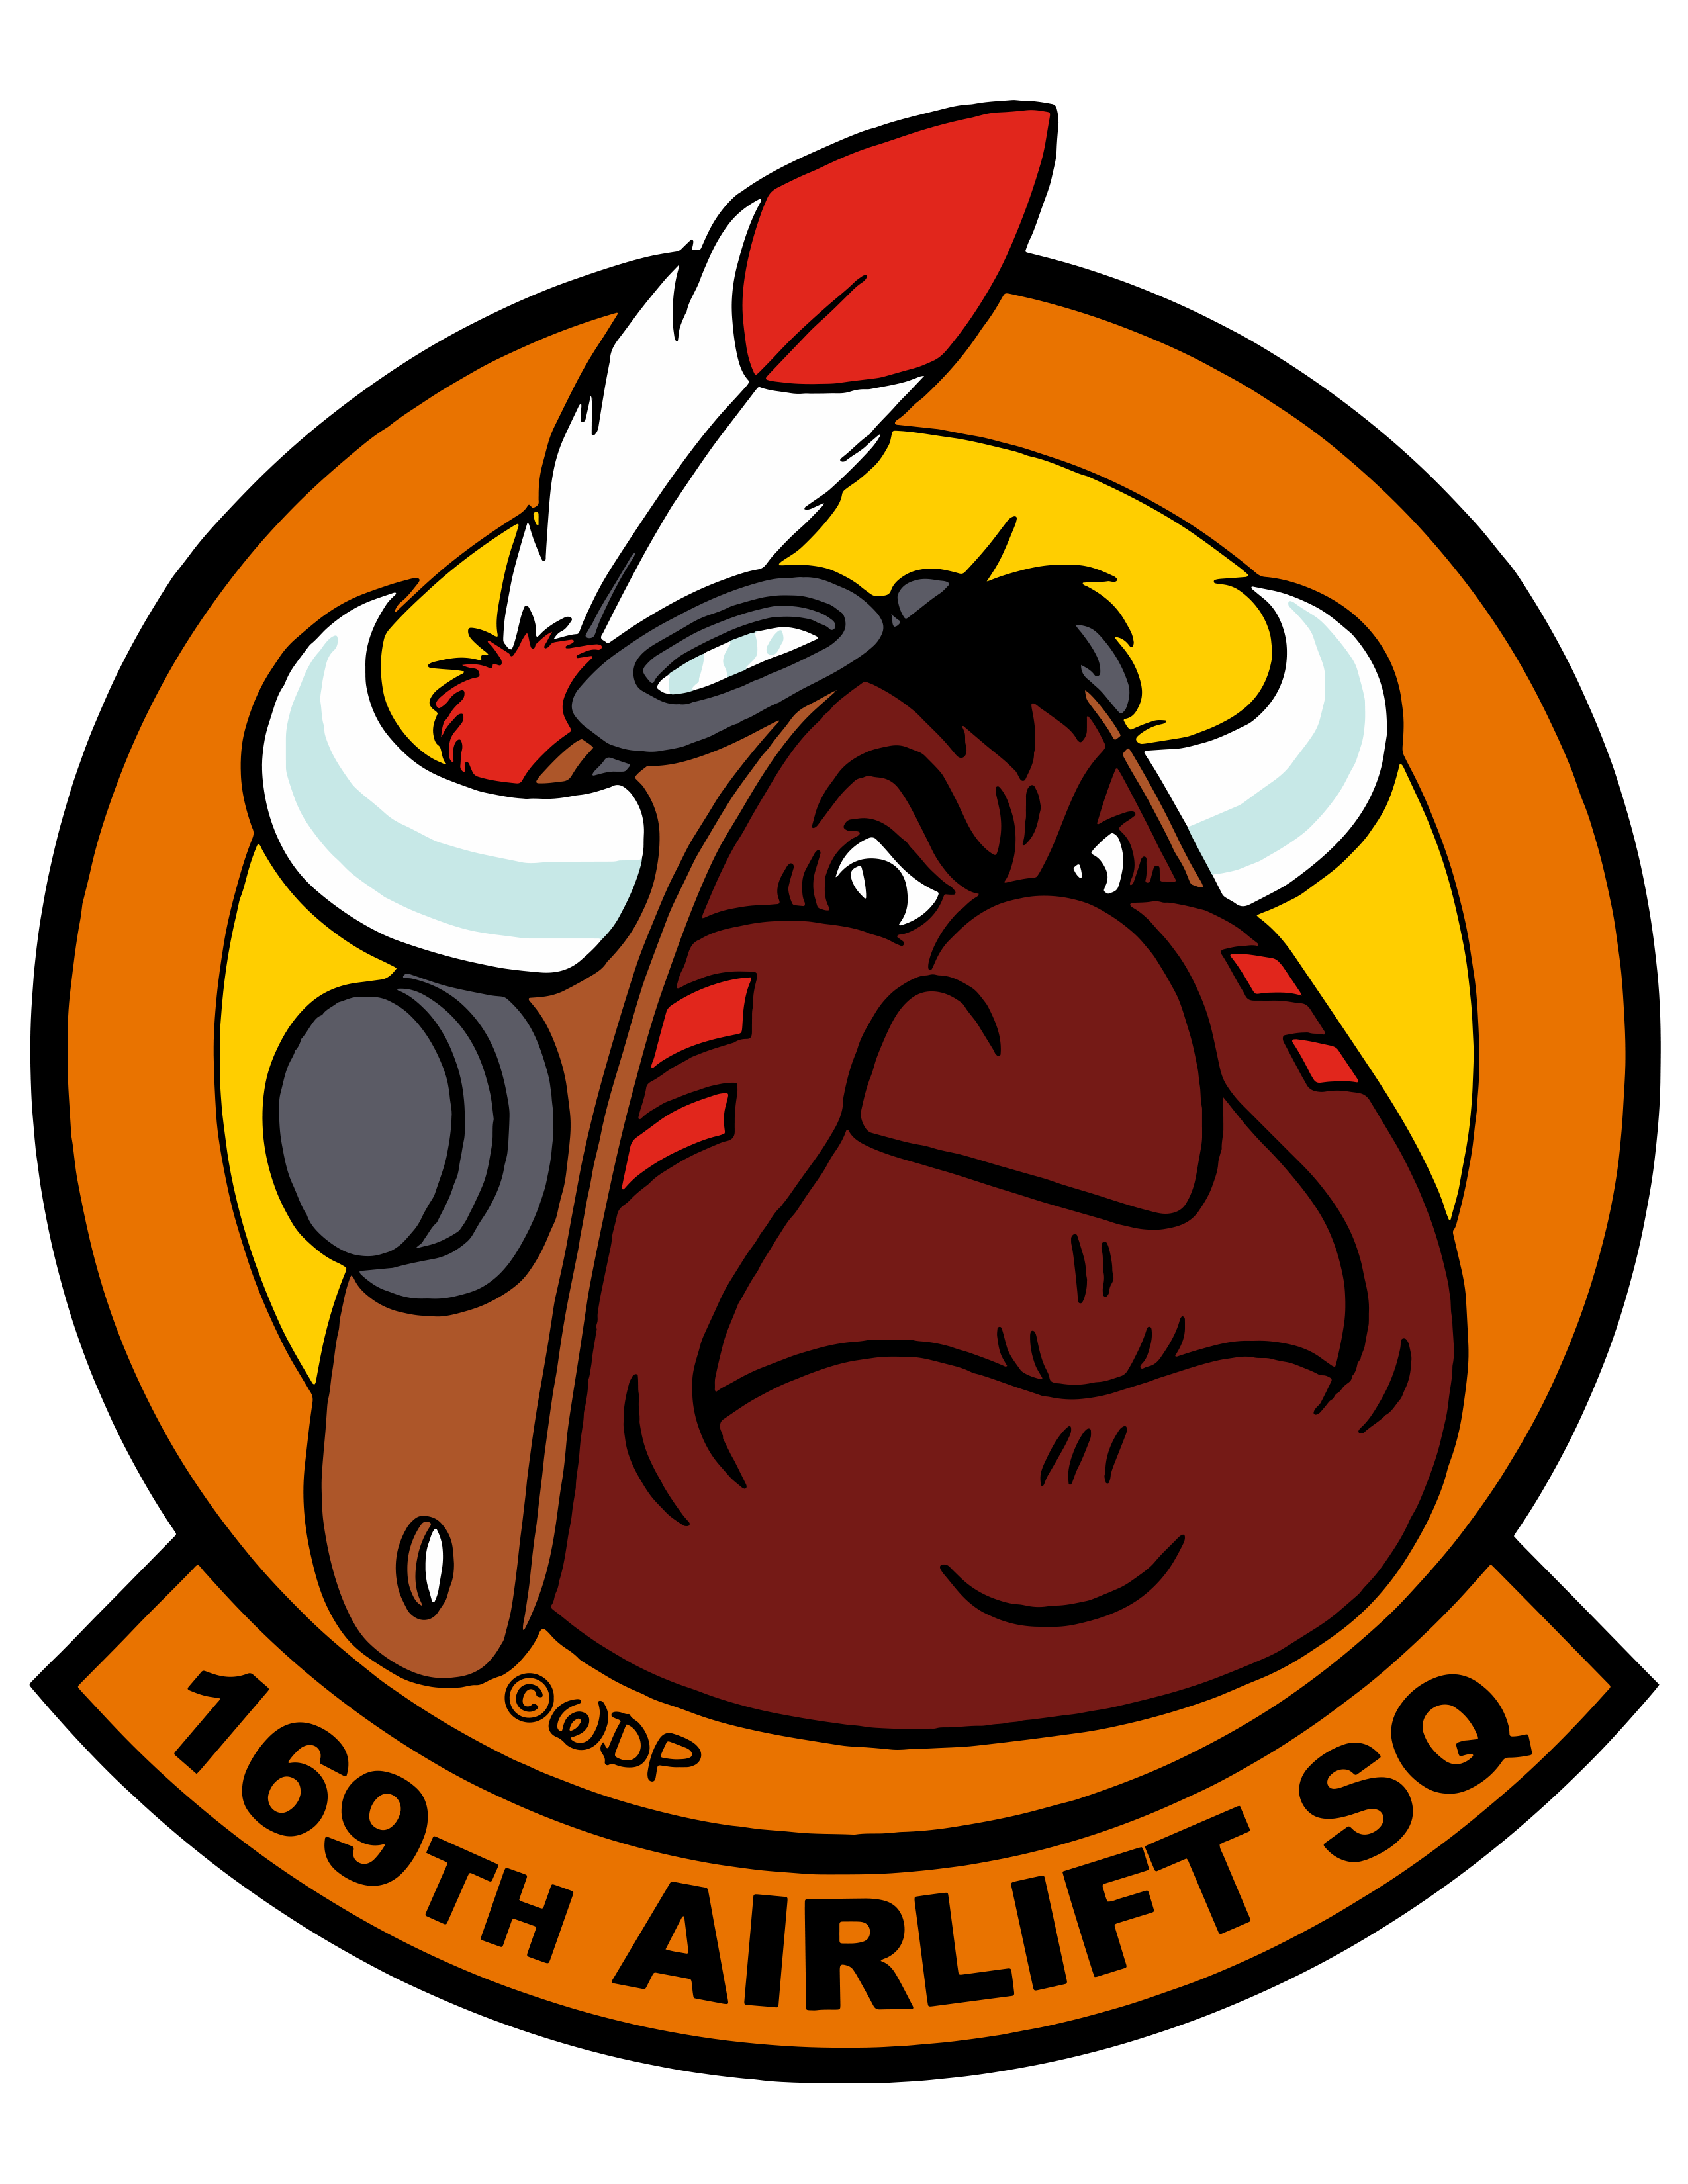 169th Airlift Squadron Wood Logo